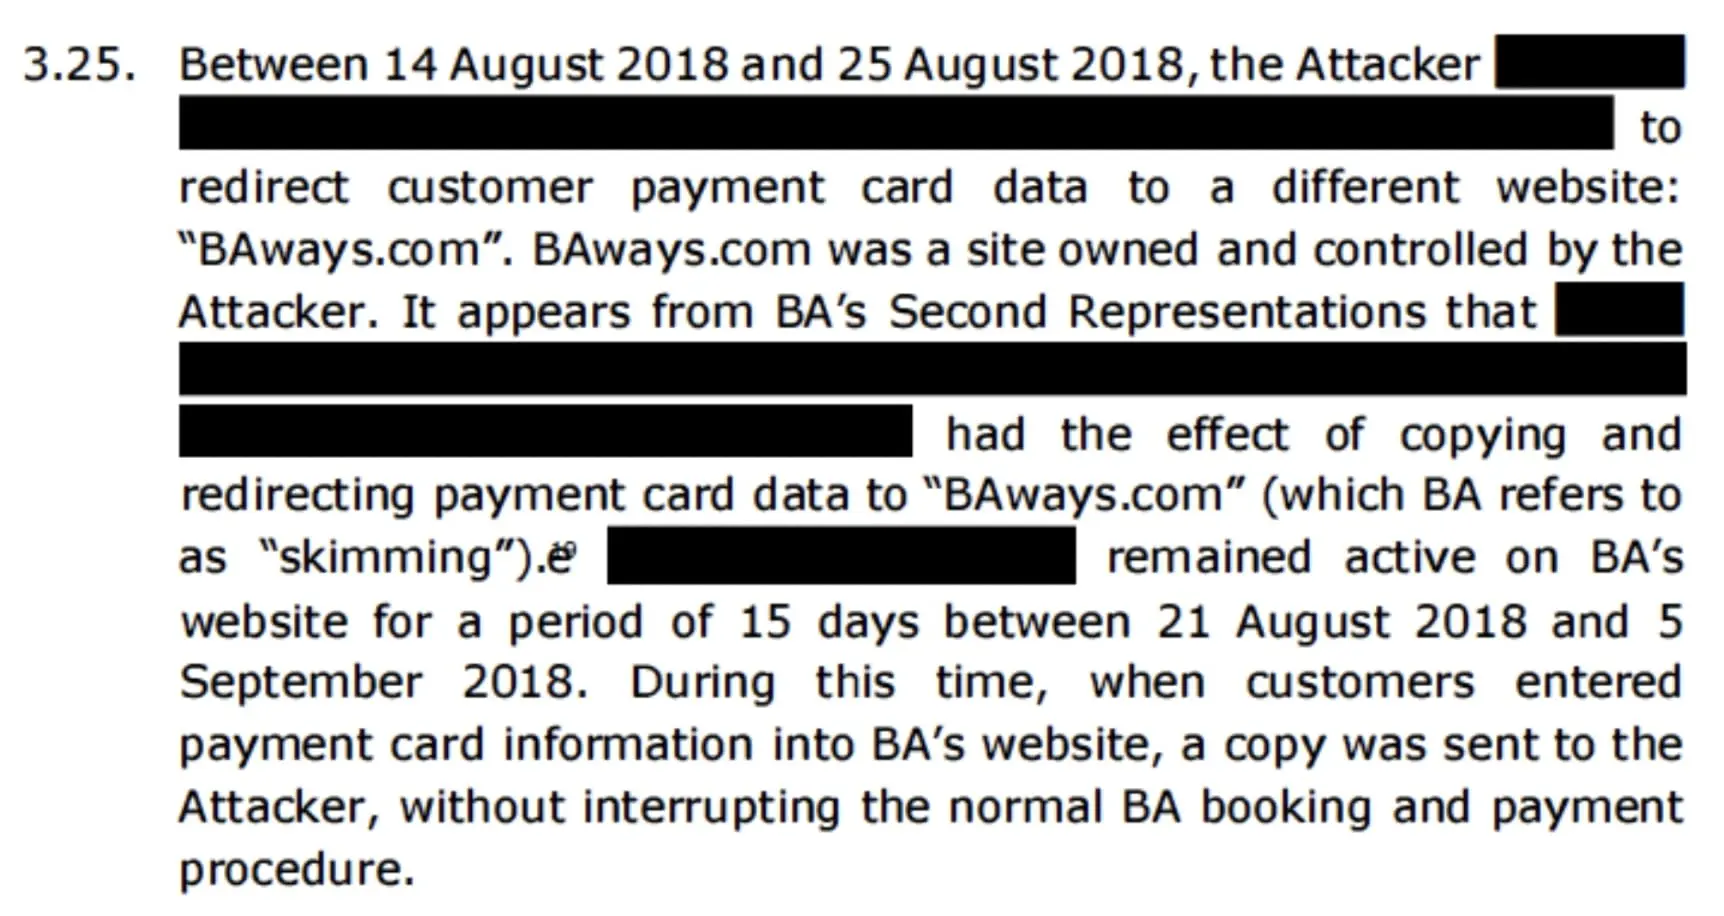 A description of the attack from the penalty notice (as follows): 3.25. Between 14 August 2018 and 25 August 2018, the Attacker [redacted] to redirect customer payment card data to a different website: 'BAways.com'. BAways.com was a site owned and controlled by the Attacker. It appears from BA's Second Representations that [redacted] had the effect of copying and redirecting payment card data to 'BAways.com' (which BA refers to as 'skimming'). [redacted] remained active on BA's website for a period of 15 days between 21 August 2018 and 5 September 2018. During this time, when customers entered payment card information into BA's website, a copy was sent to the Attacker, without interrupting the normal BA booking and payment procedure.